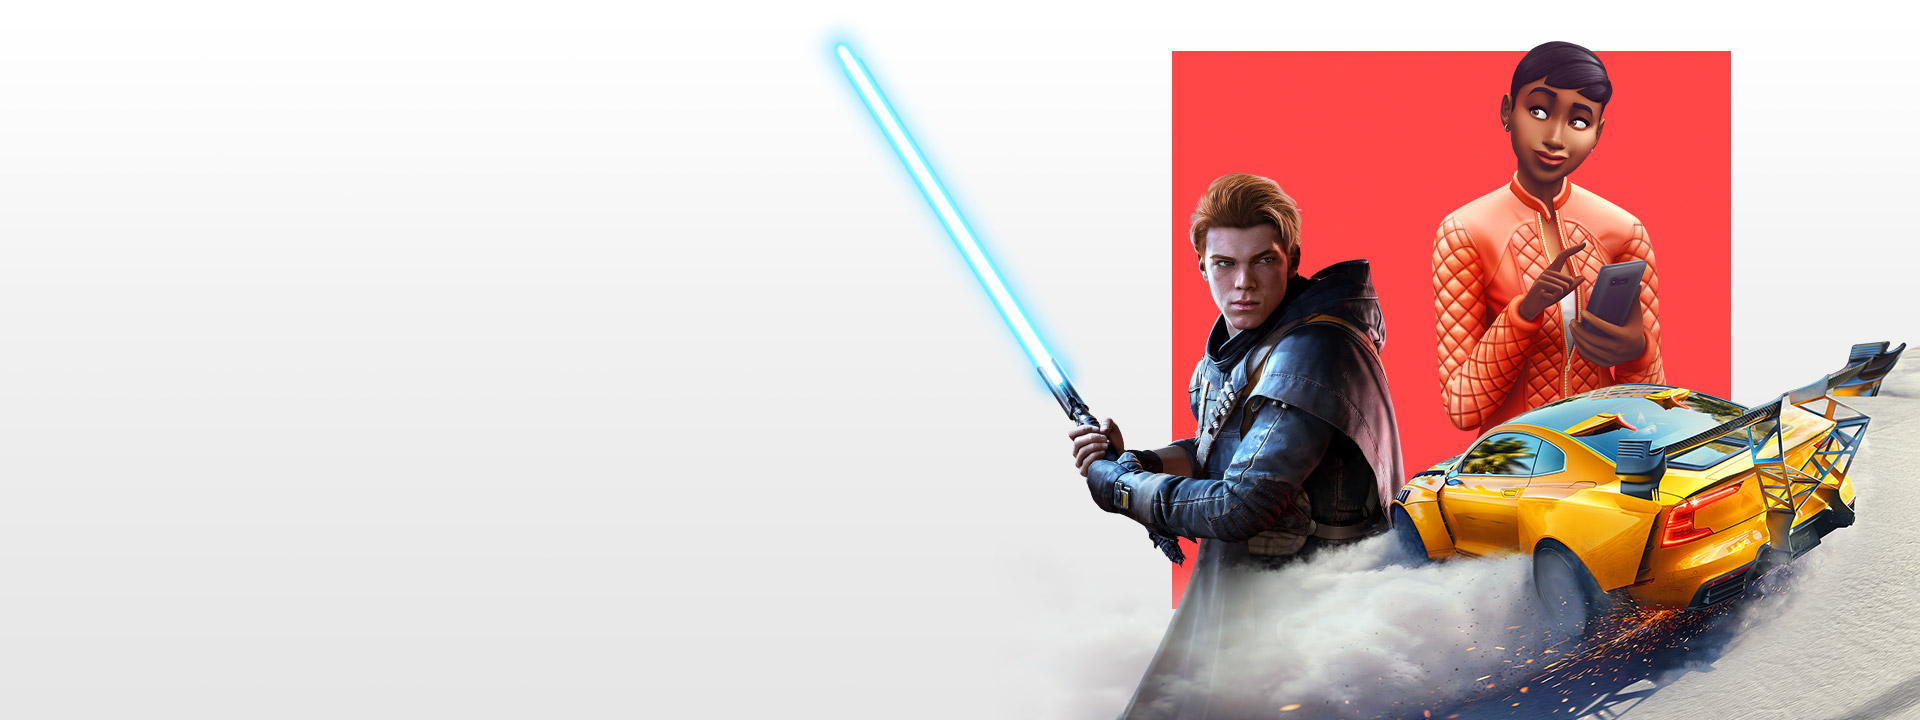 Герої з Star Wars Jedi: Fallen Order, Sims 4 і Need for Speed Hot Pursuit Remastered